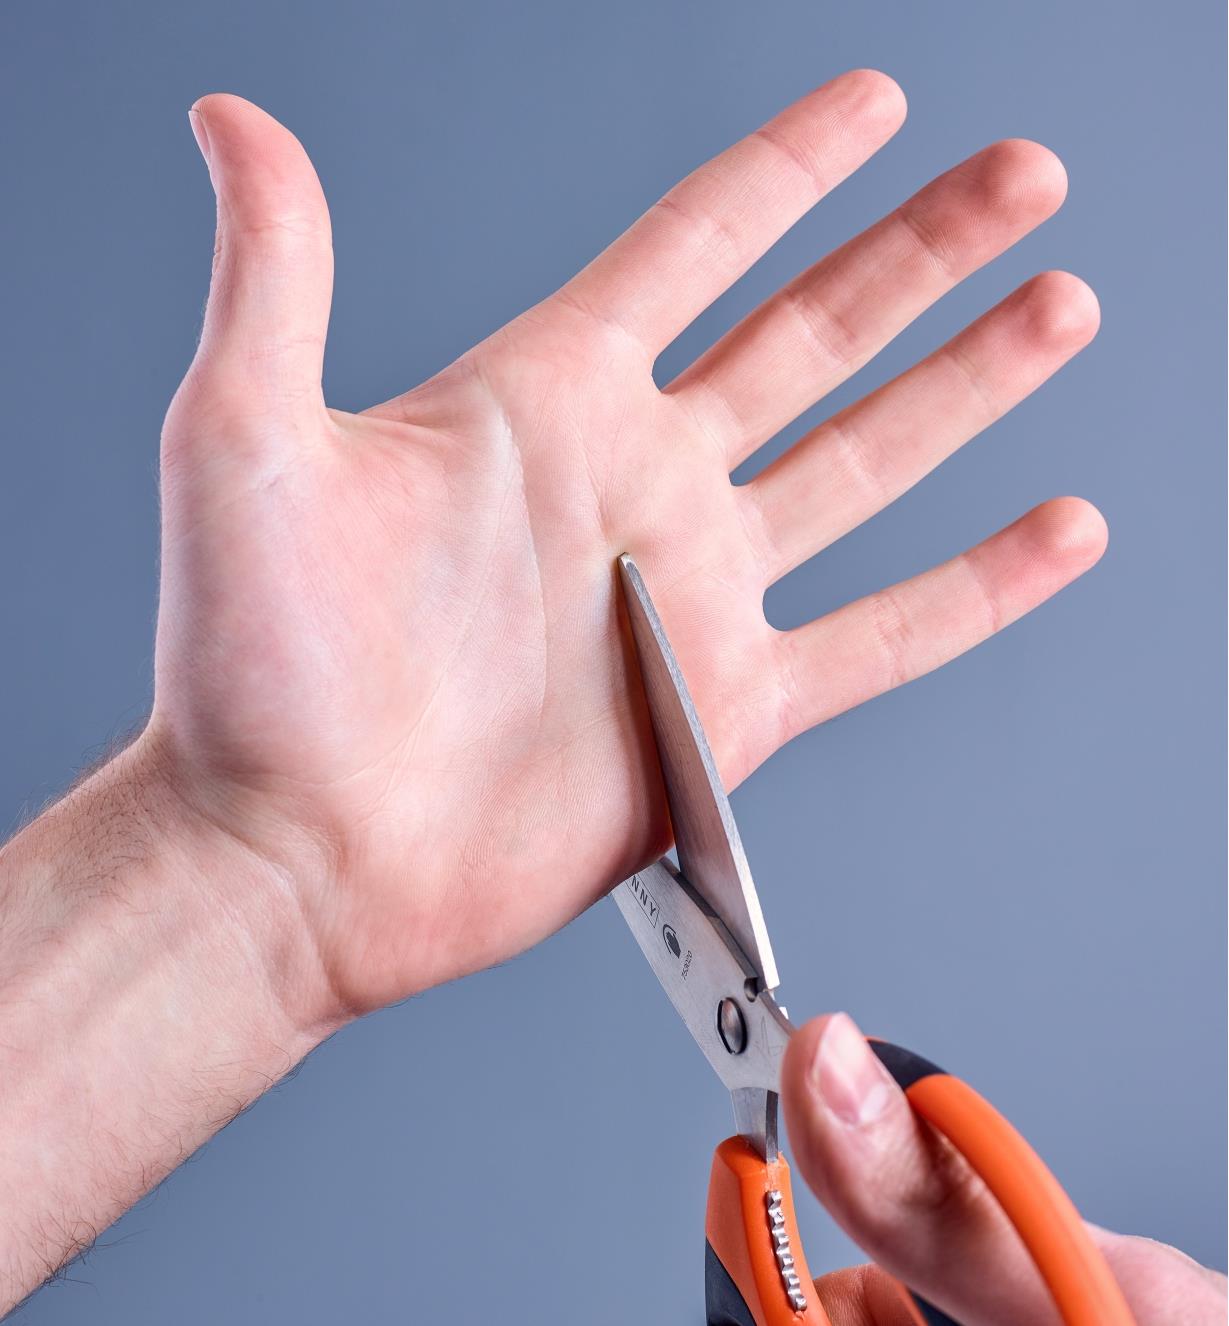 Closing the scissors around a person's hand to demonstrate that they won't cut skin